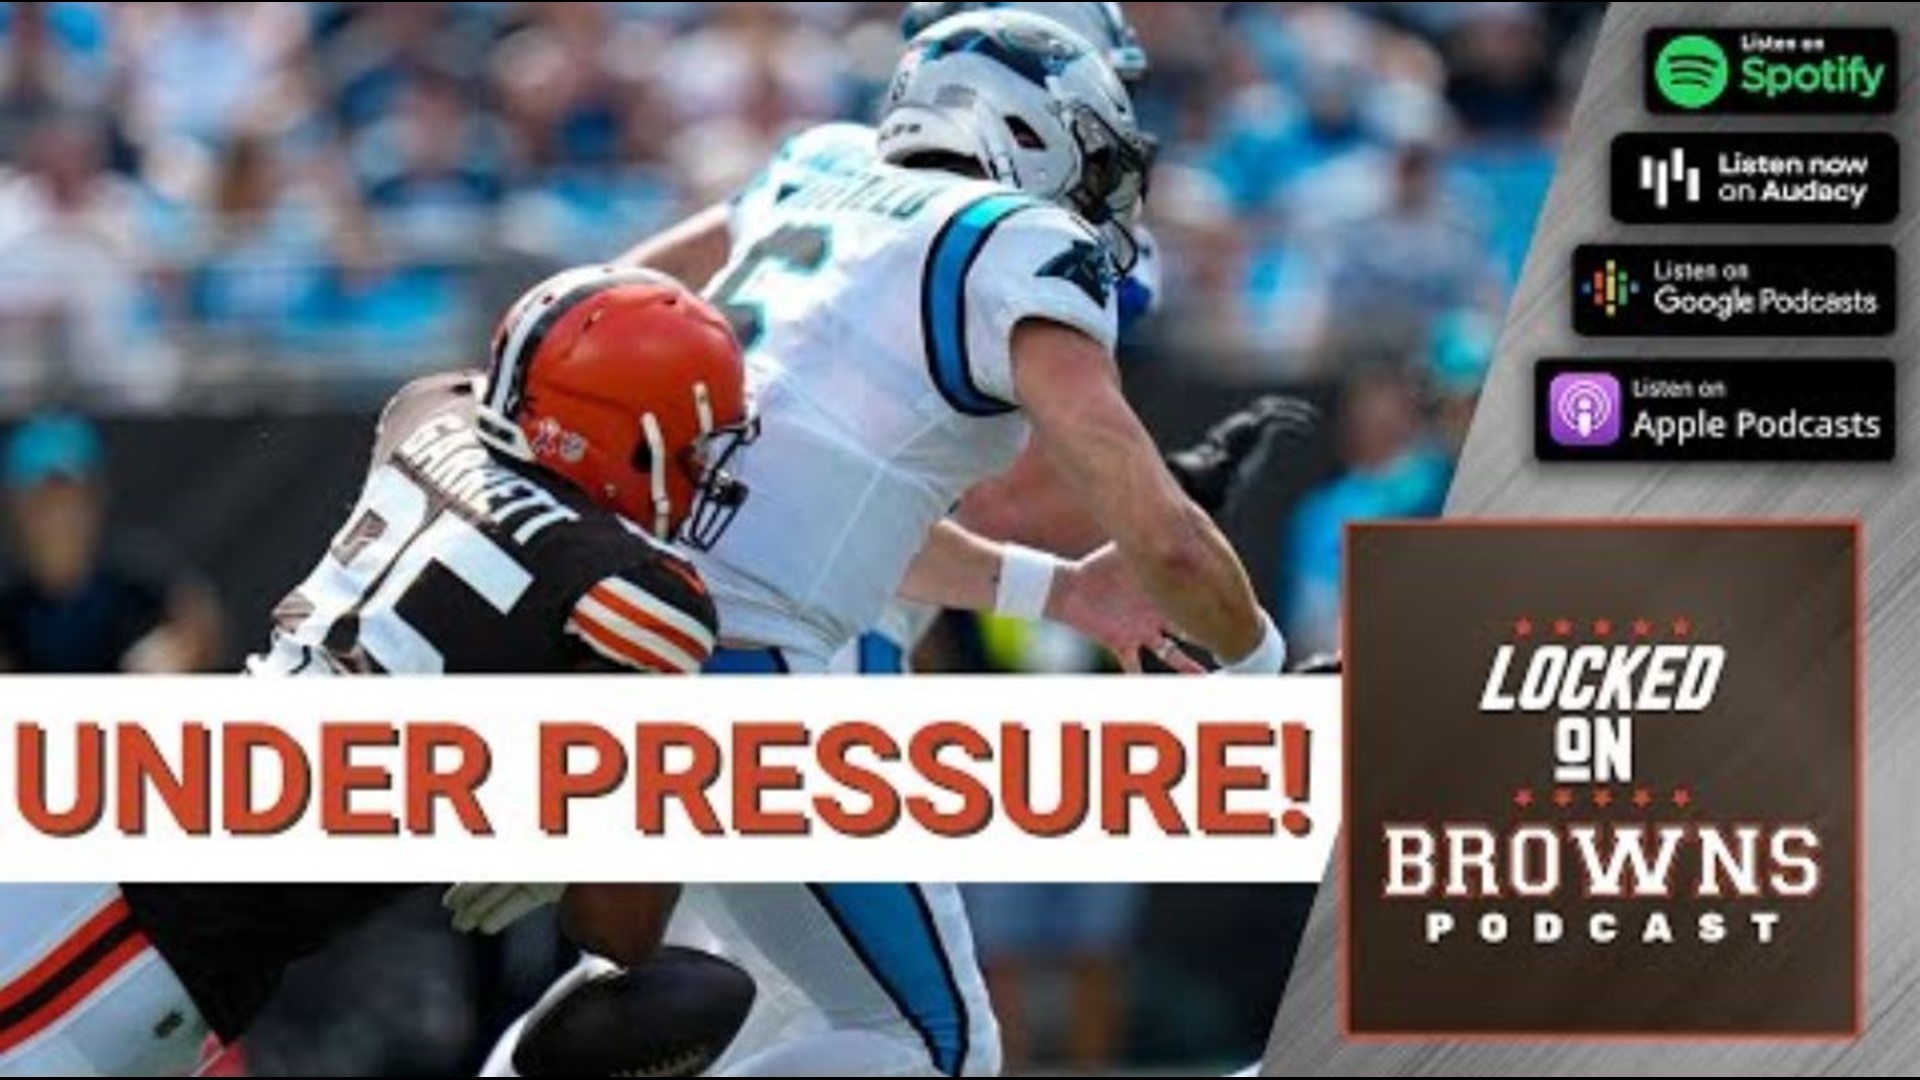 The Browns defeated the Panthers on Sunday, 26-24, but that’s just what the scoreboard said. Here are the real winners and losers from the game.